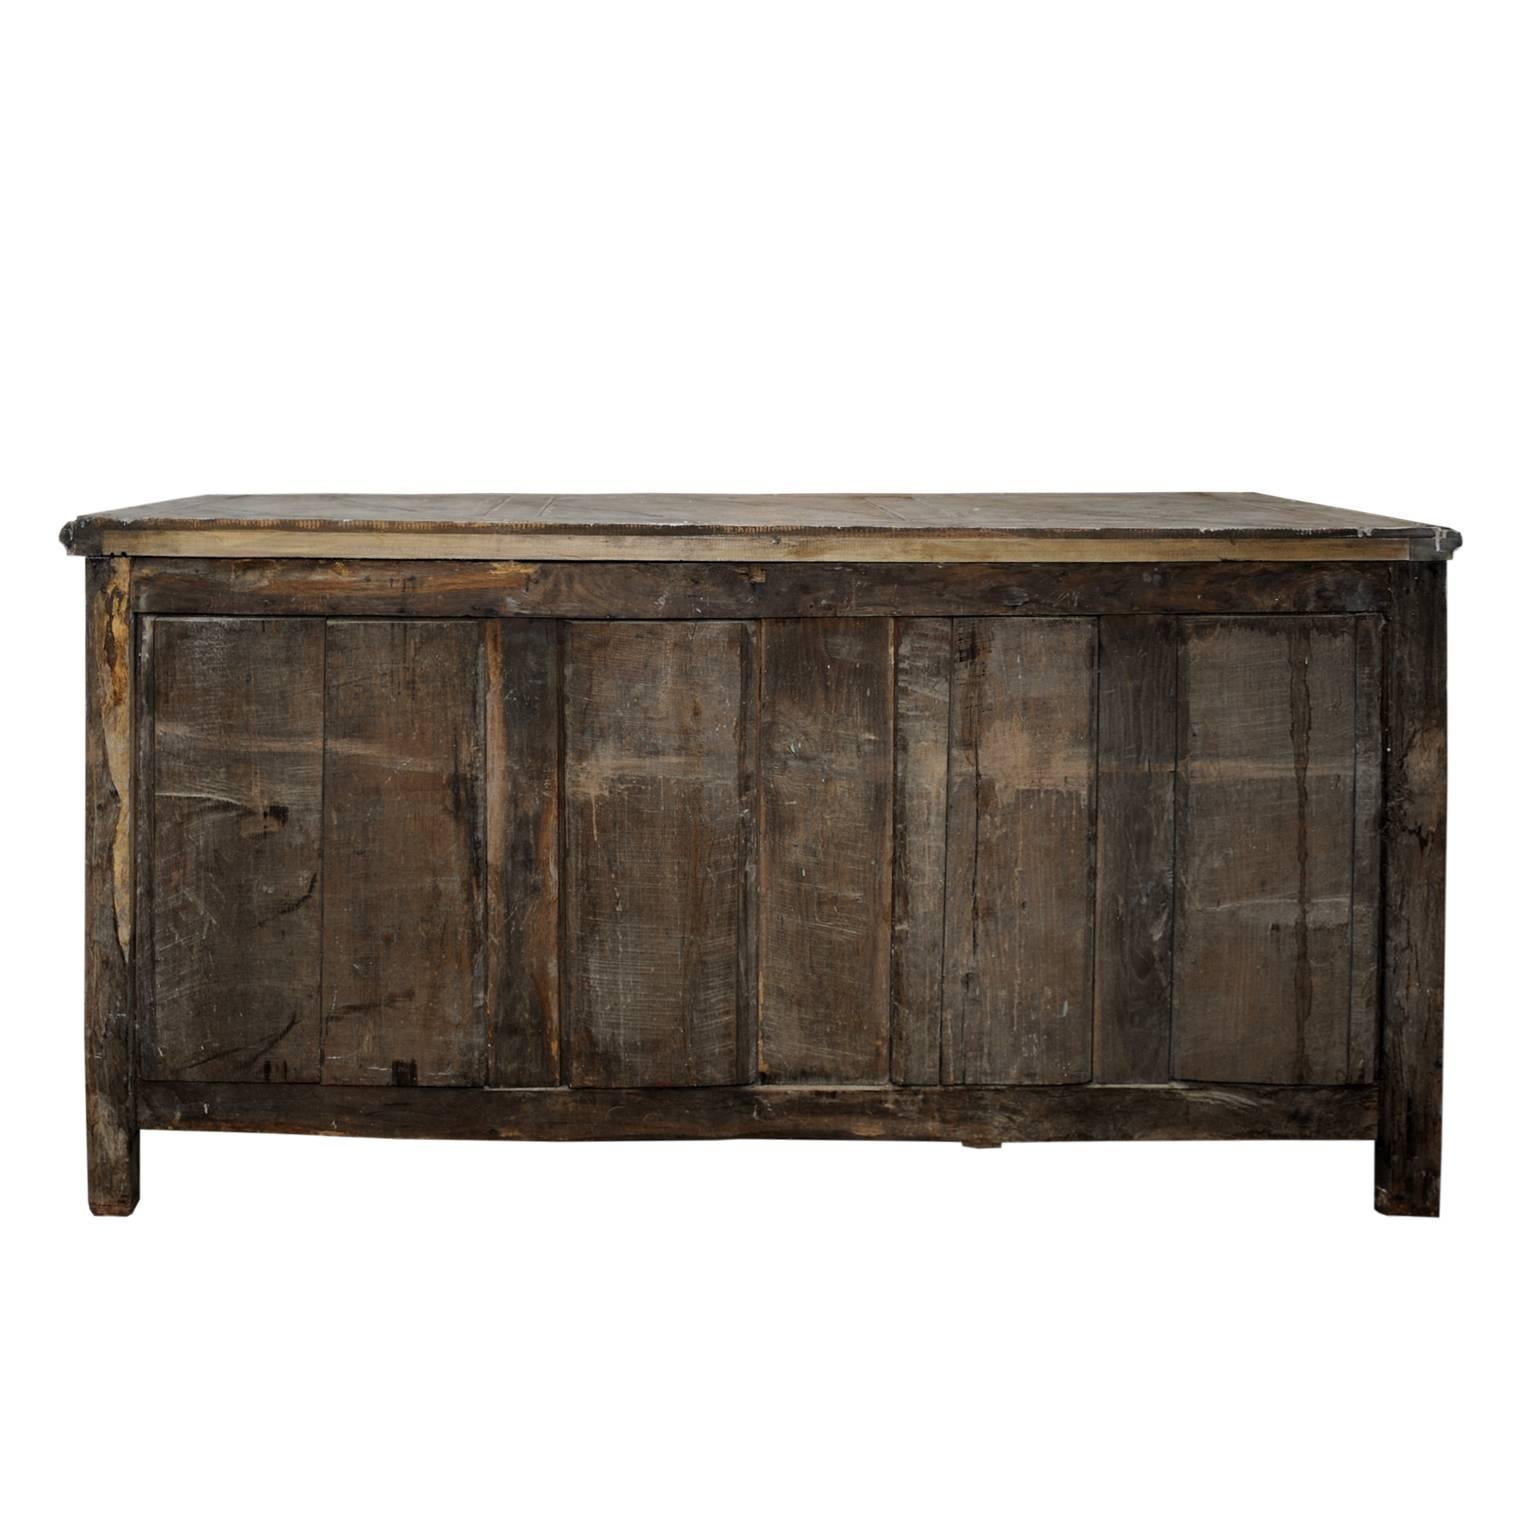 French Mid-19th Century Louis XV Painted Three-Door Enfilade Dresser, circa 1750 For Sale 1